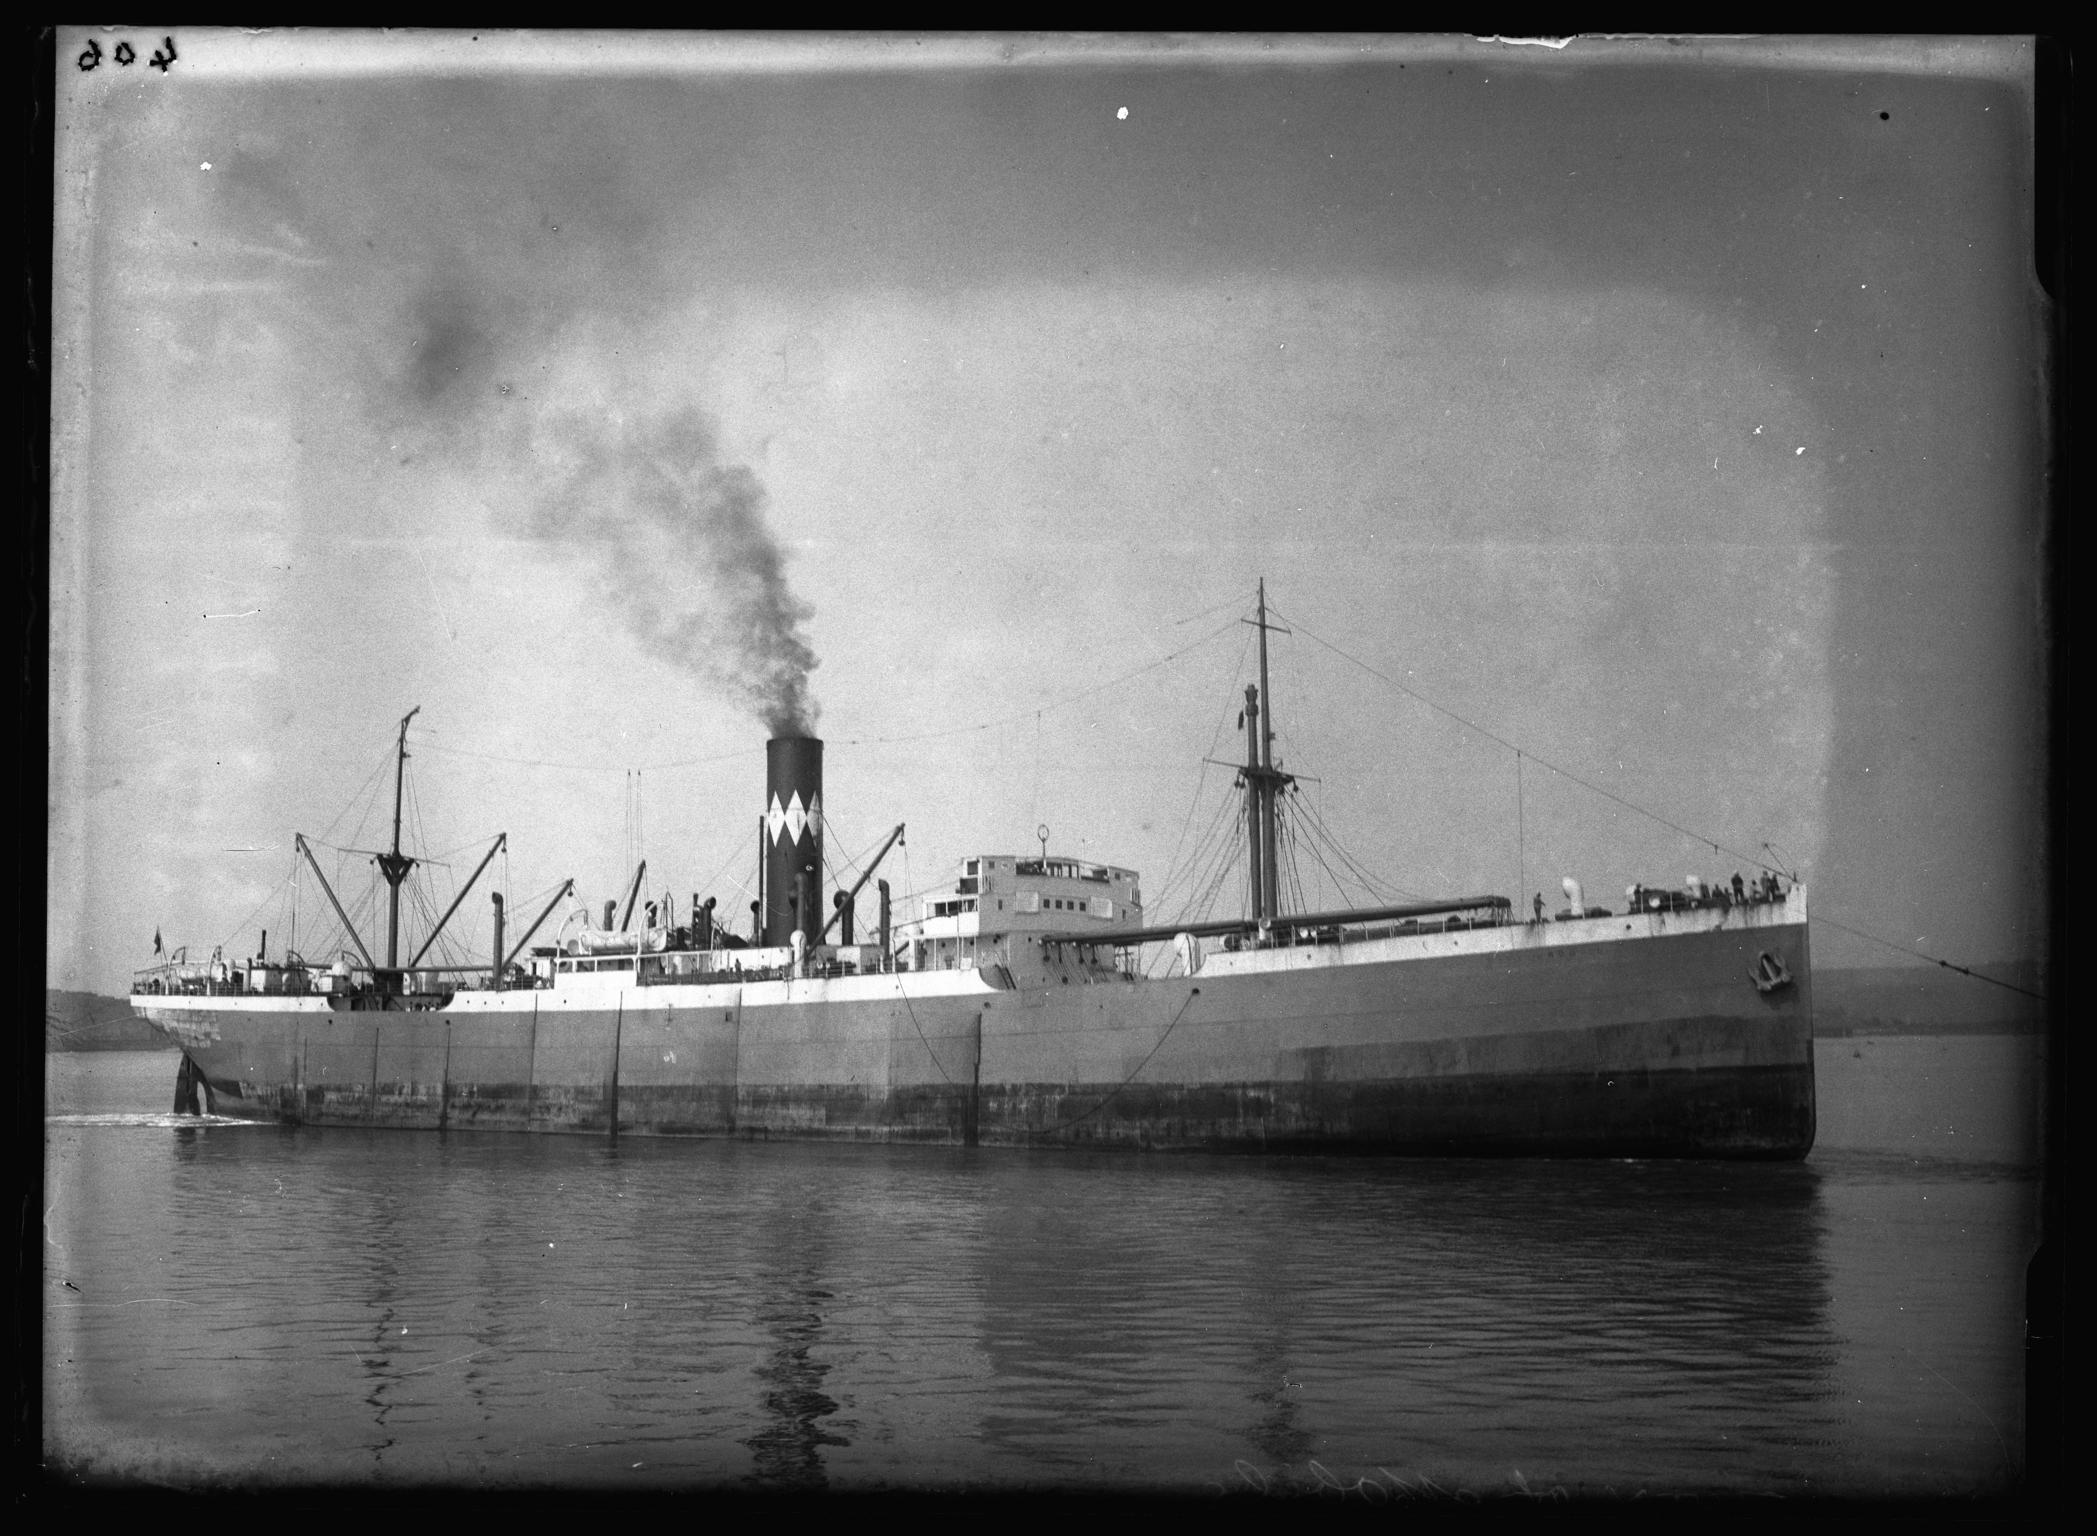 S.S. CITY OF MOBILE, glass negative